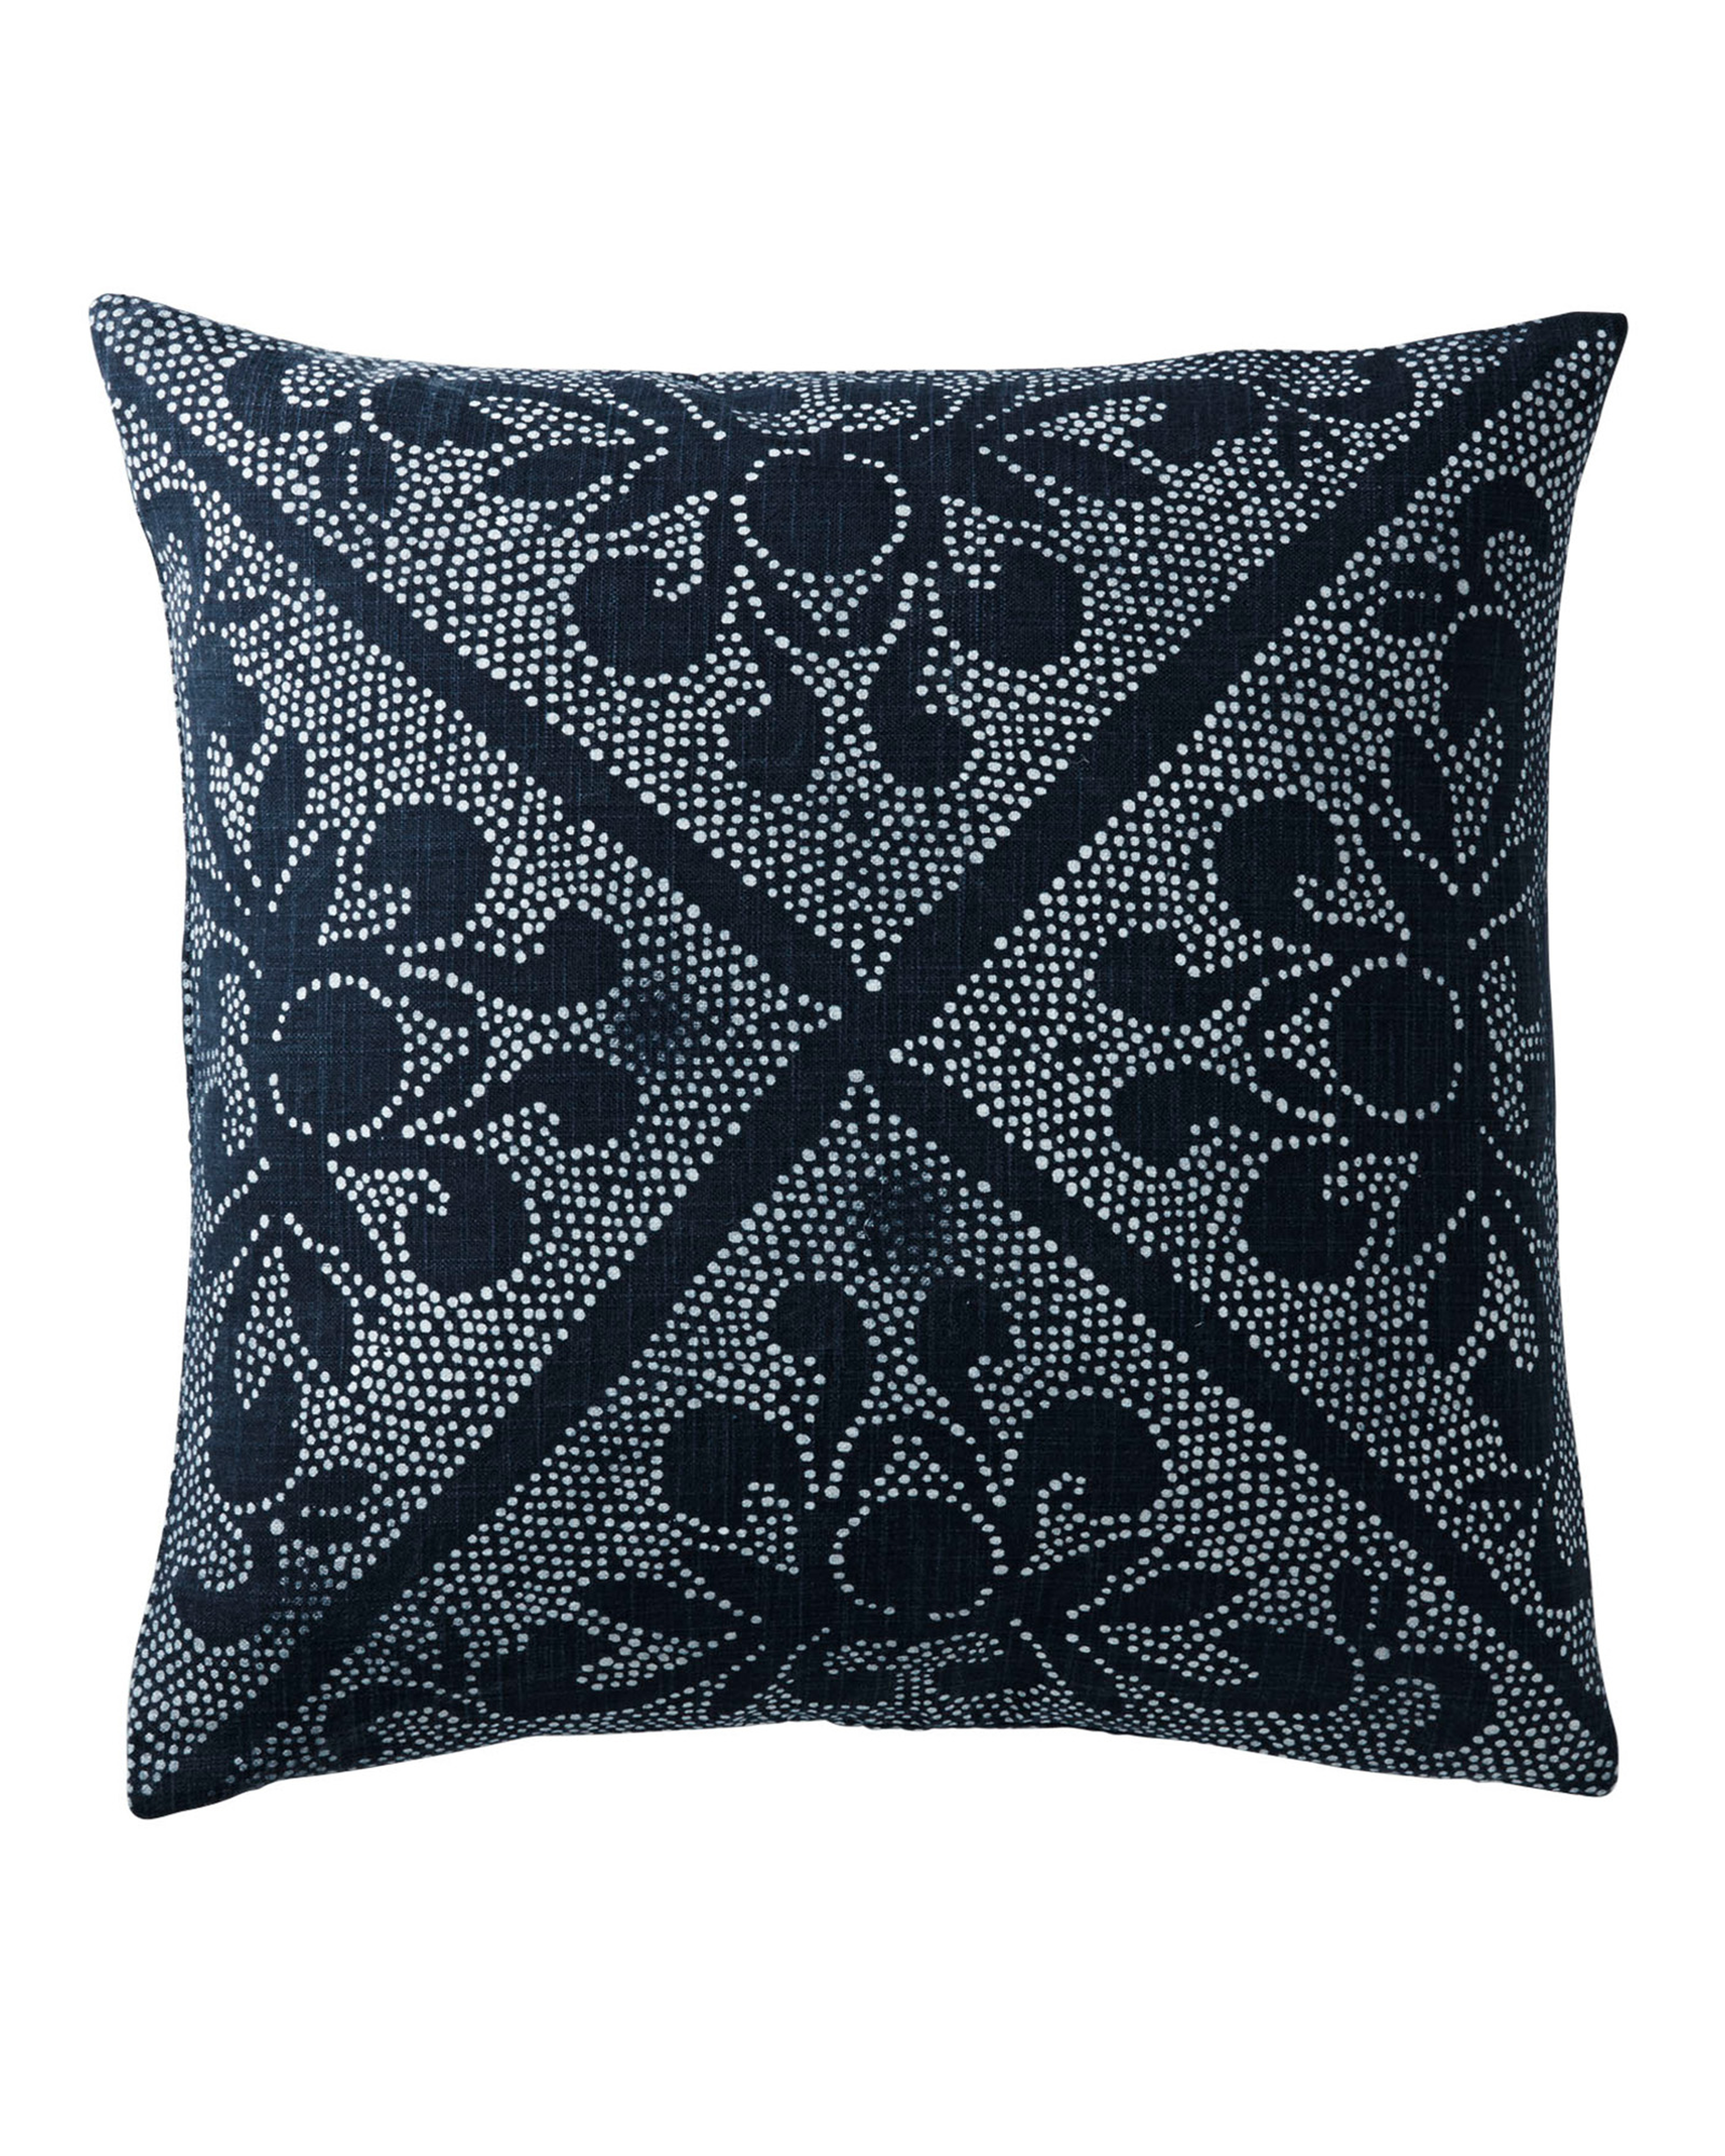 Camille Scroll 24"SQ. Pillow Cover - Indigo - Insert sold separately - Serena and Lily